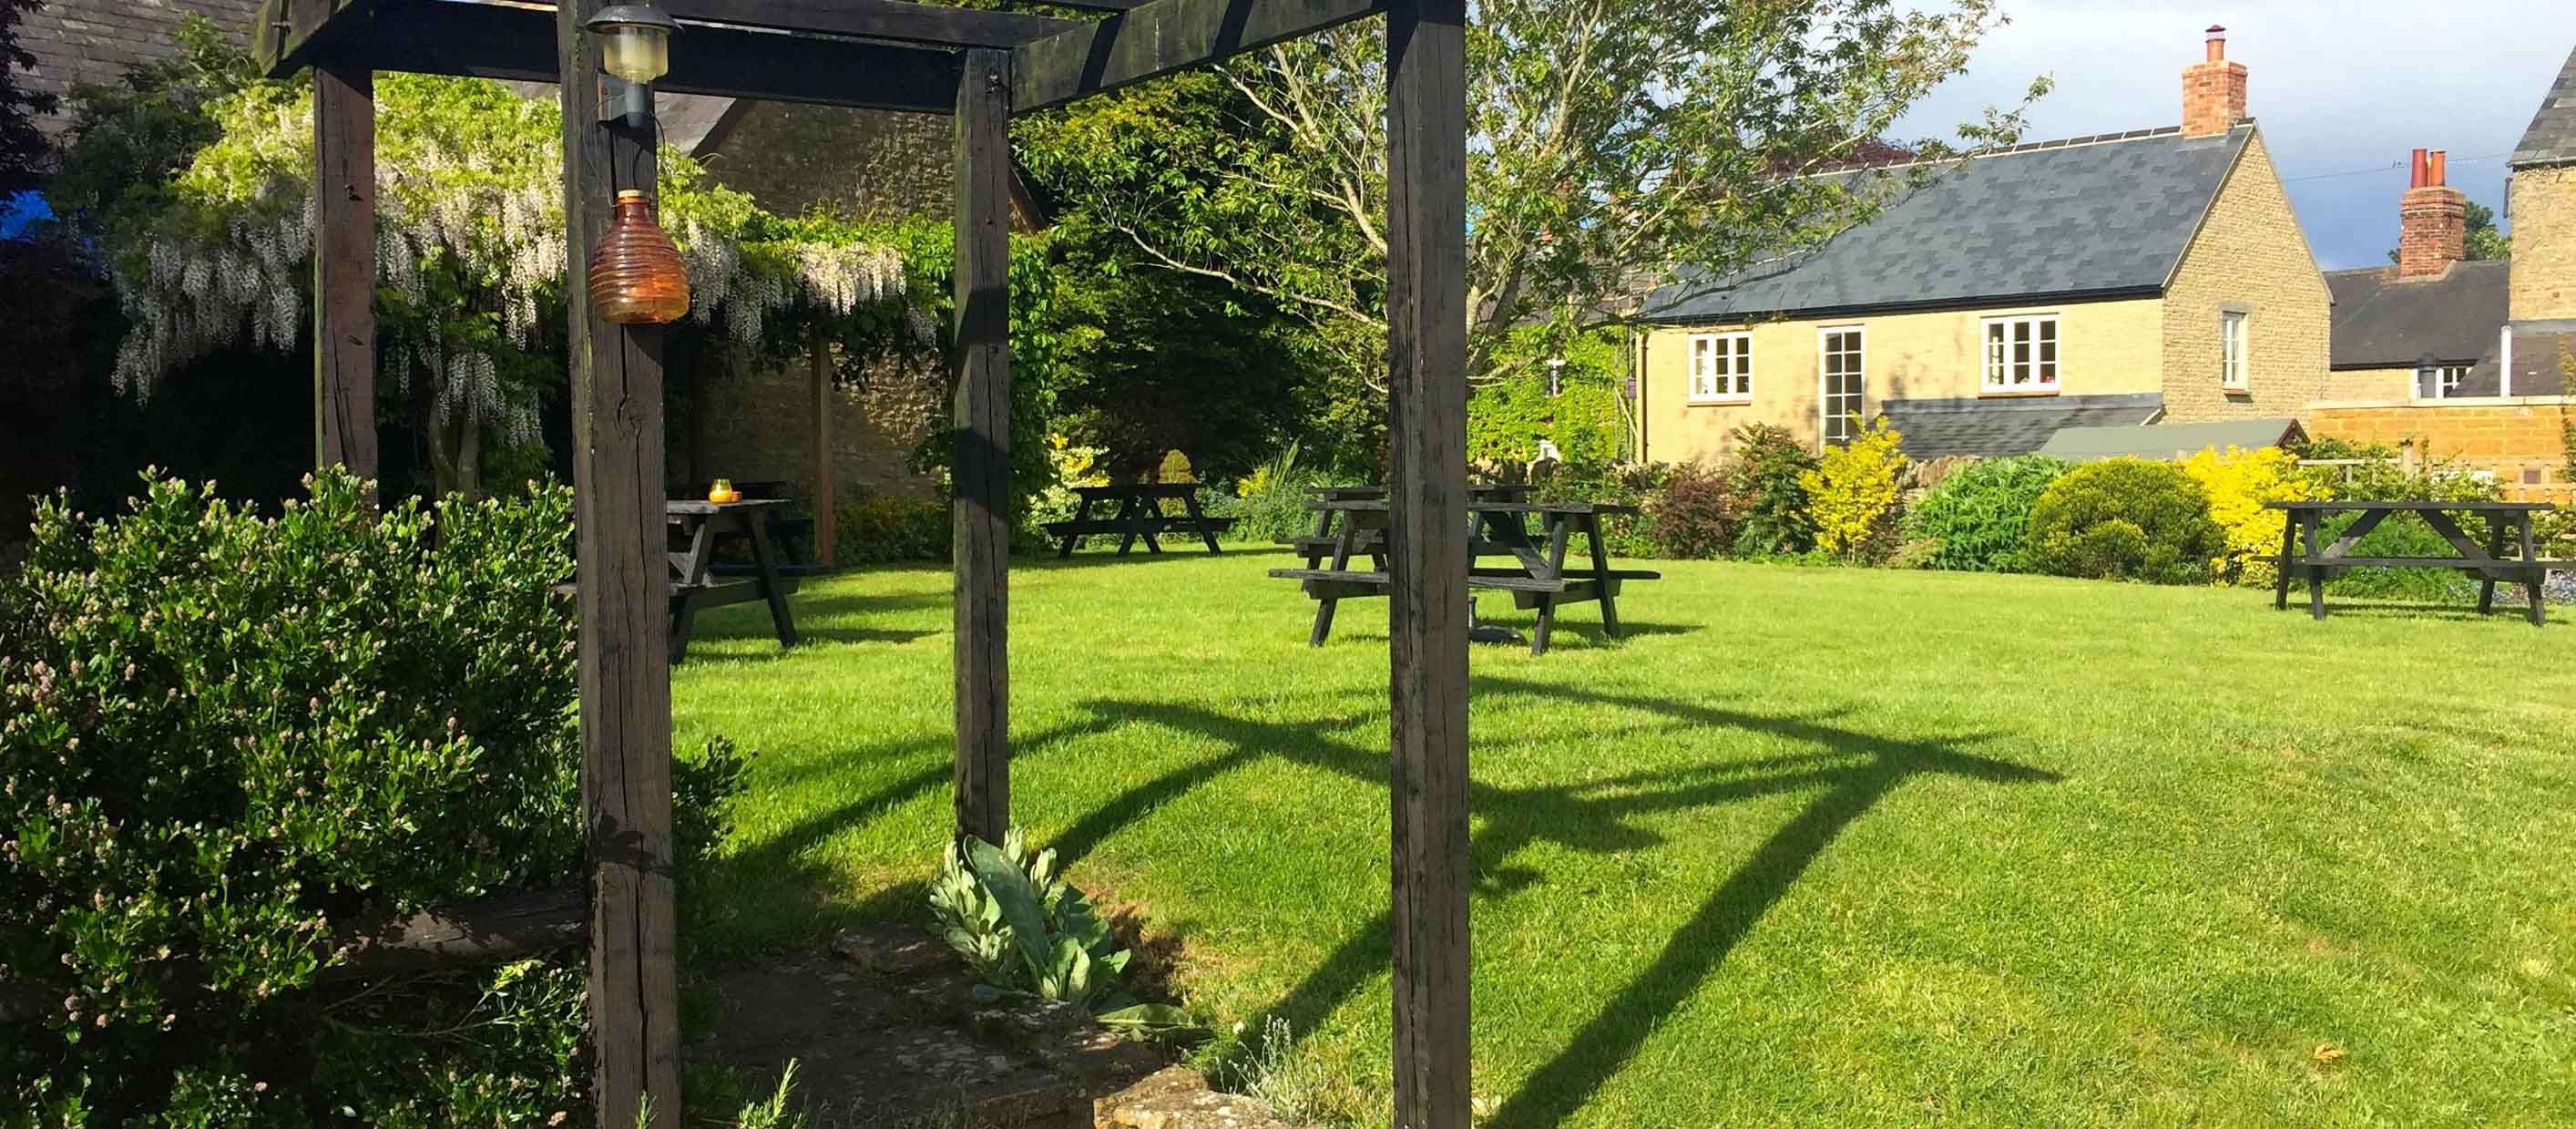 Beautiful Pub Garden offering plenty of space for safe outdoor drinks and food